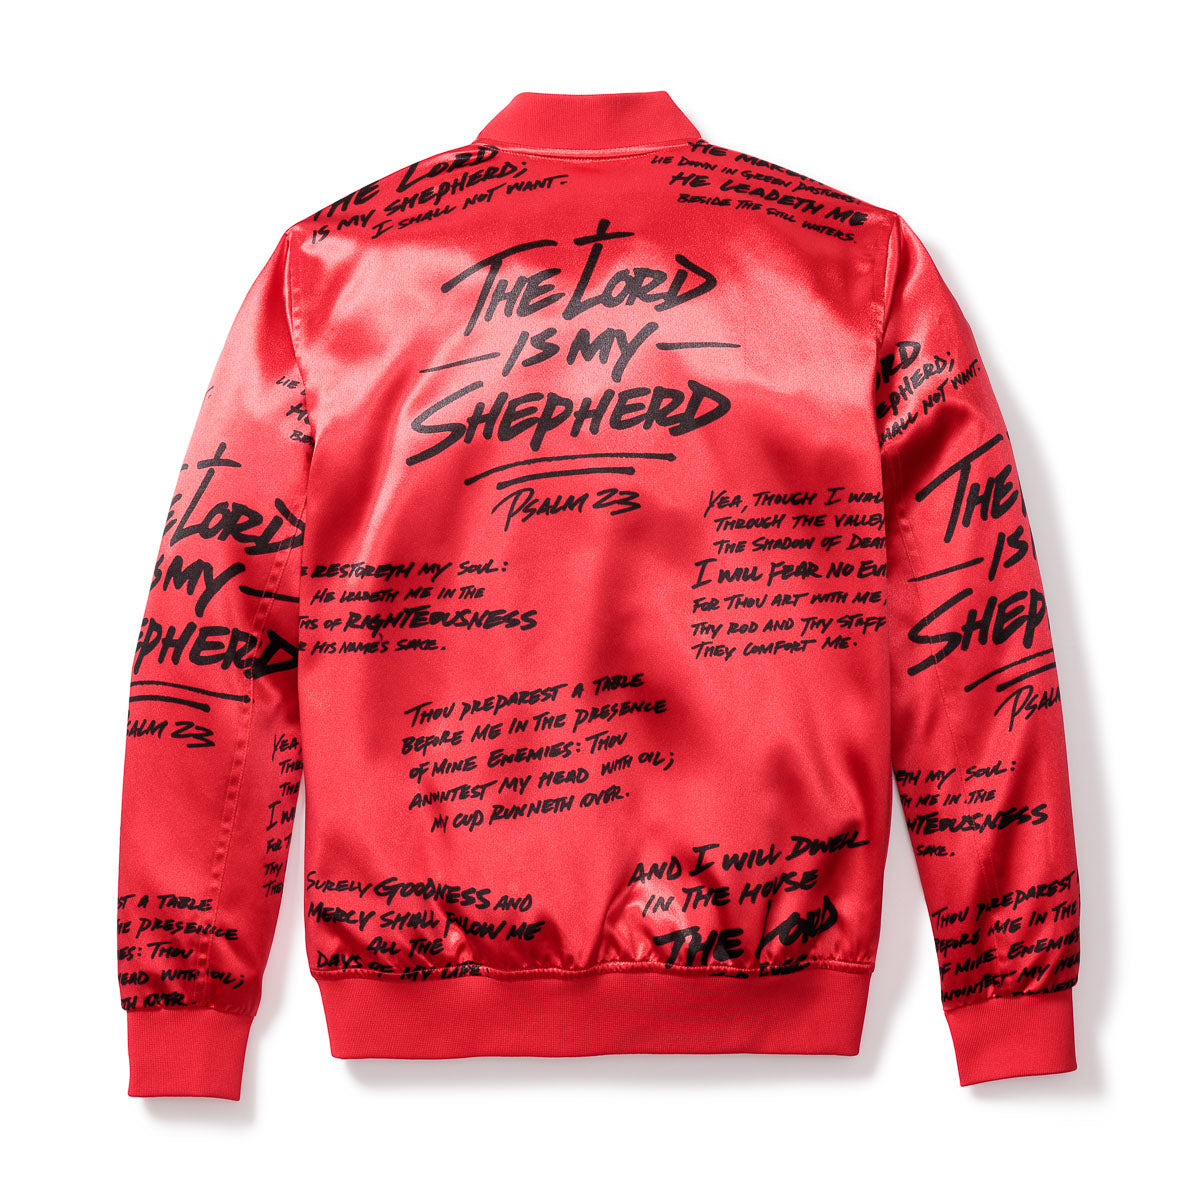 Psalm 23 Bomber Jacket - Satin Red - Limited Edition